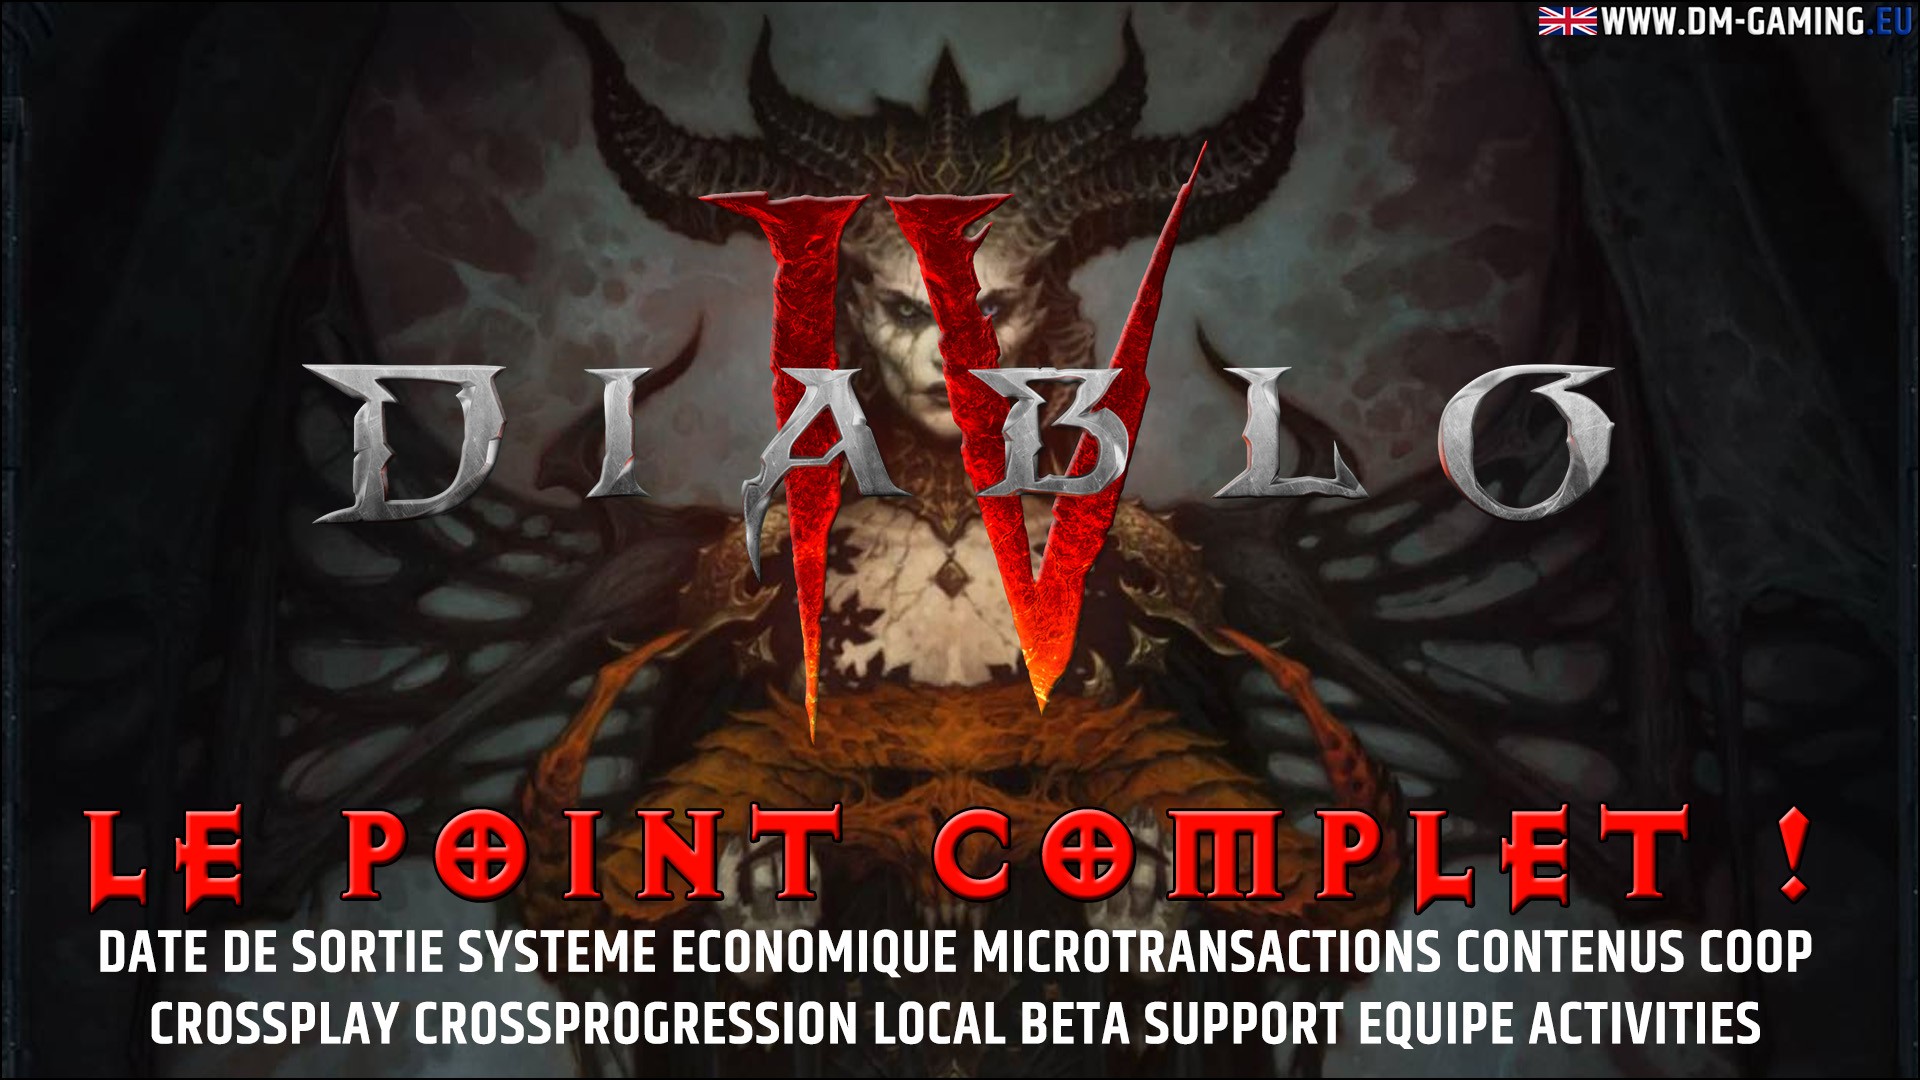 Diablo 4 release date in 2023 and complete update on the game, everything you need to know about the game!